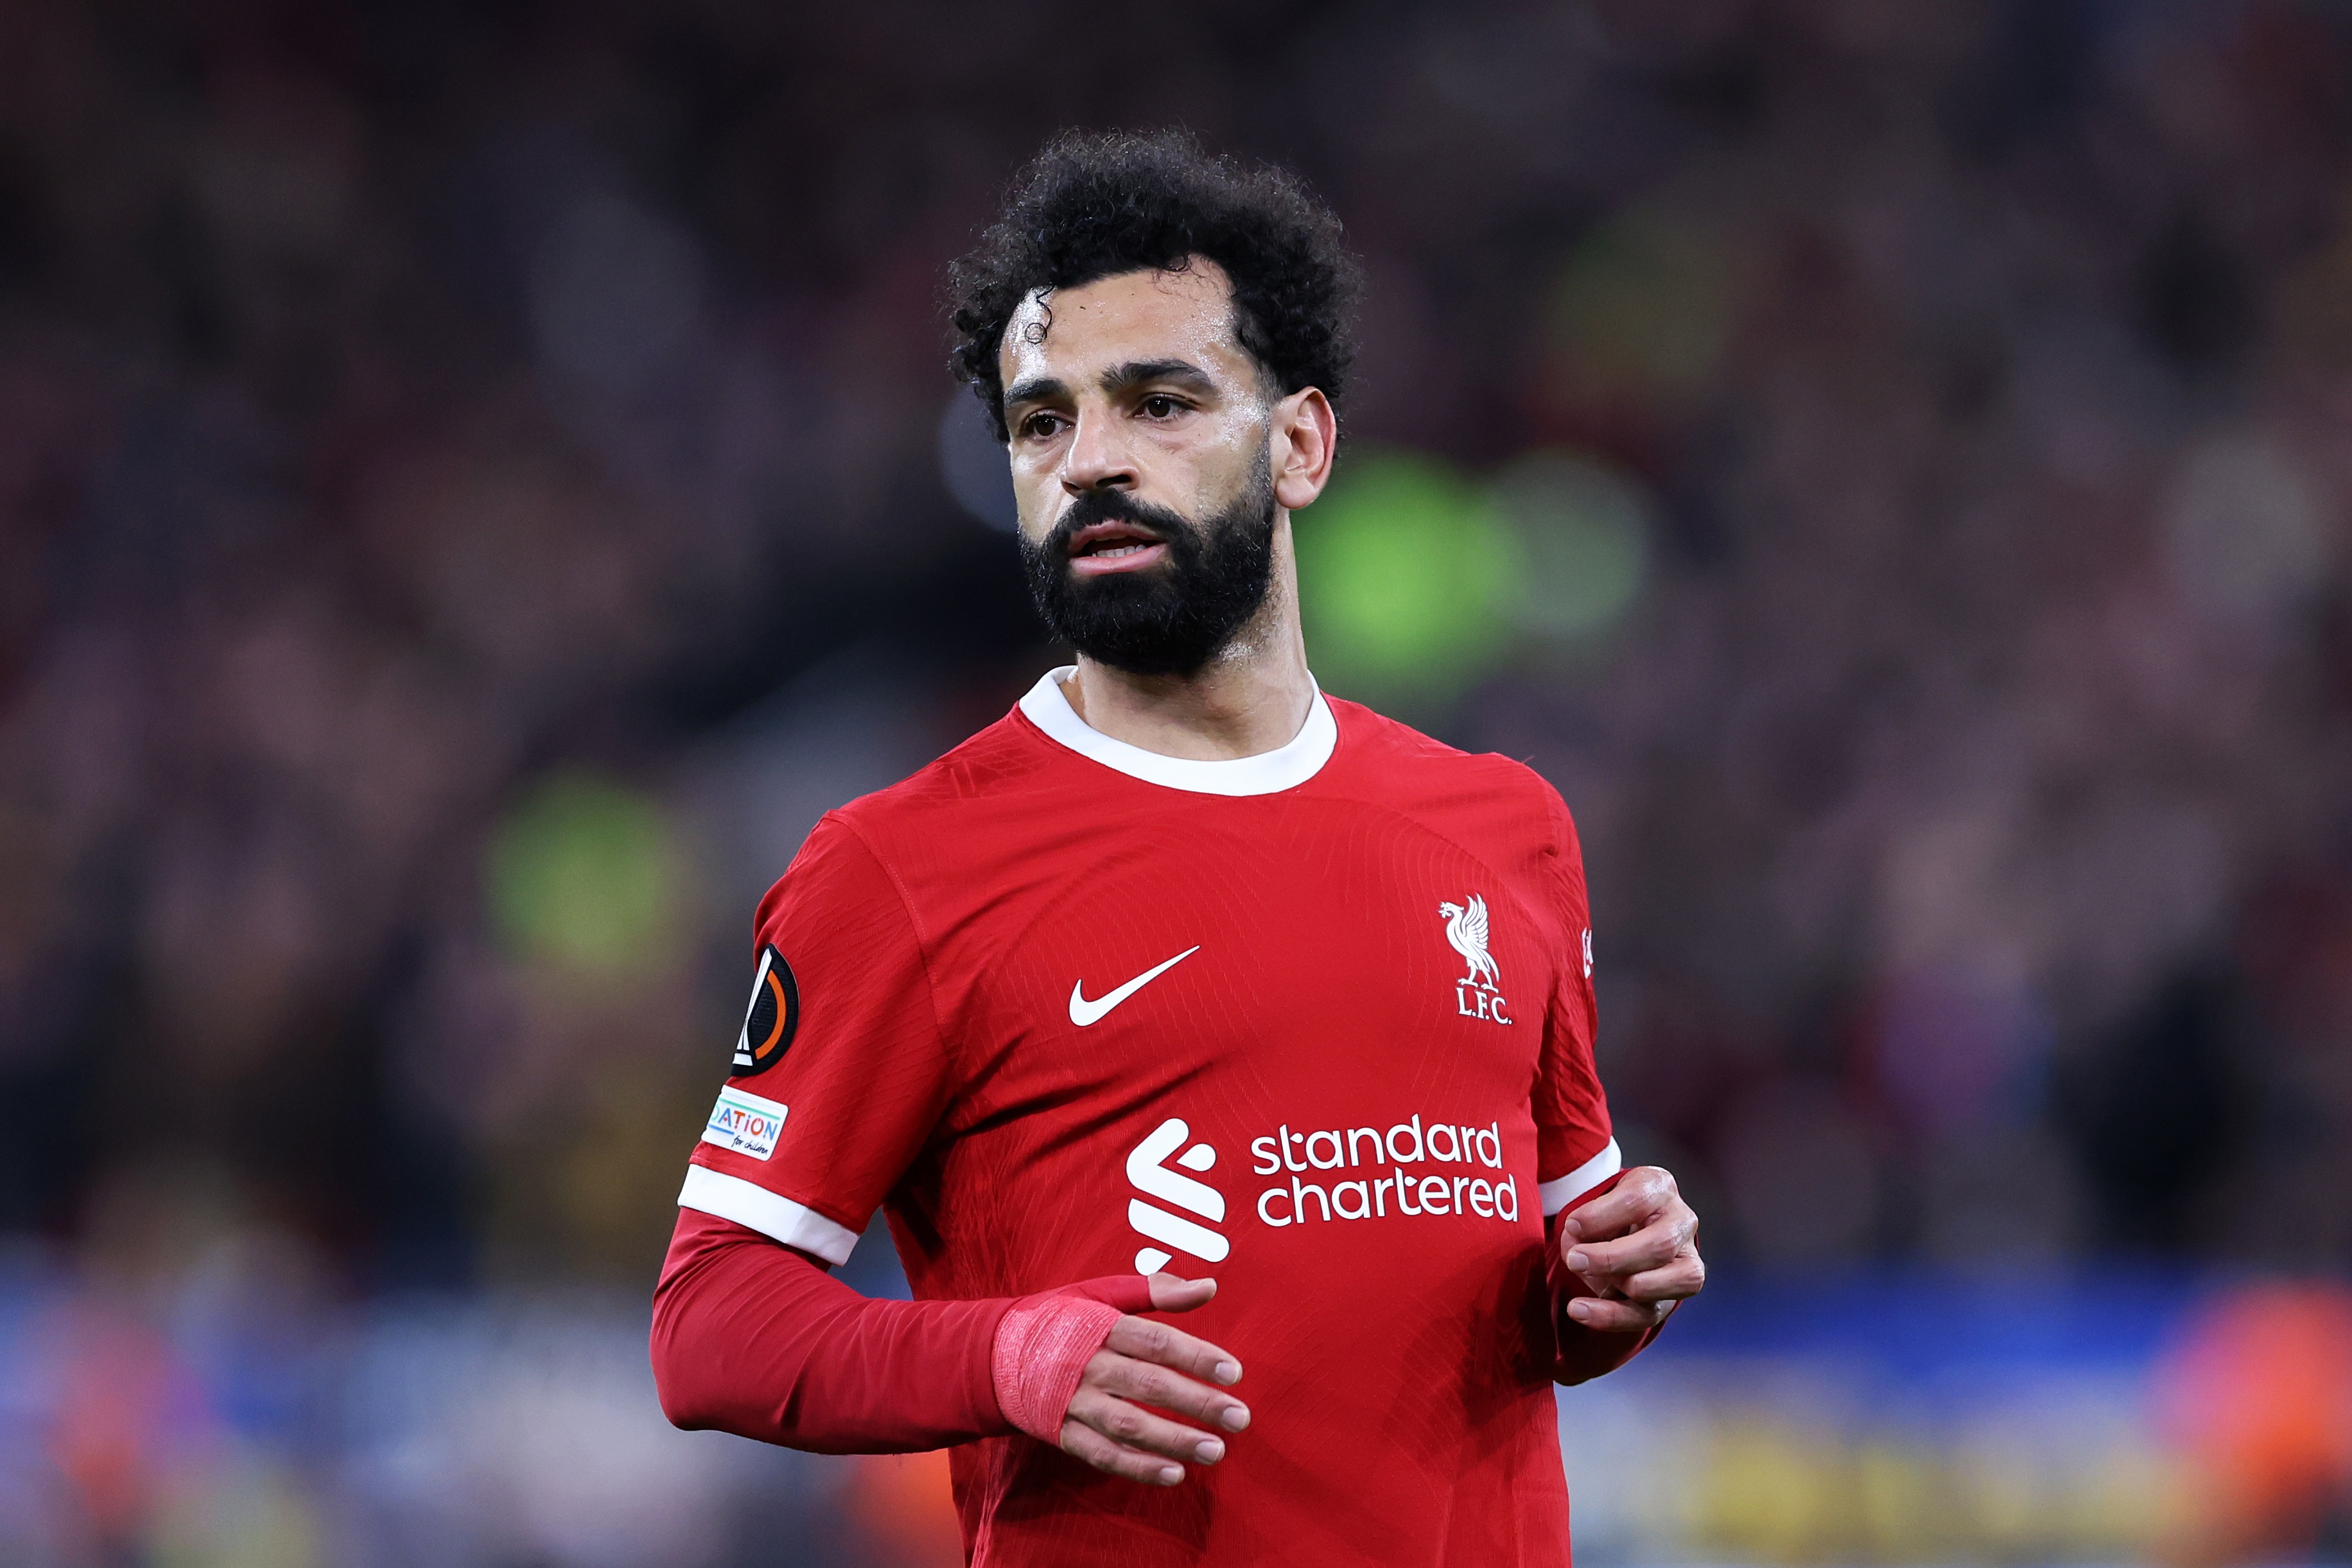 If Salah leaves, who’s the best forward to buy?